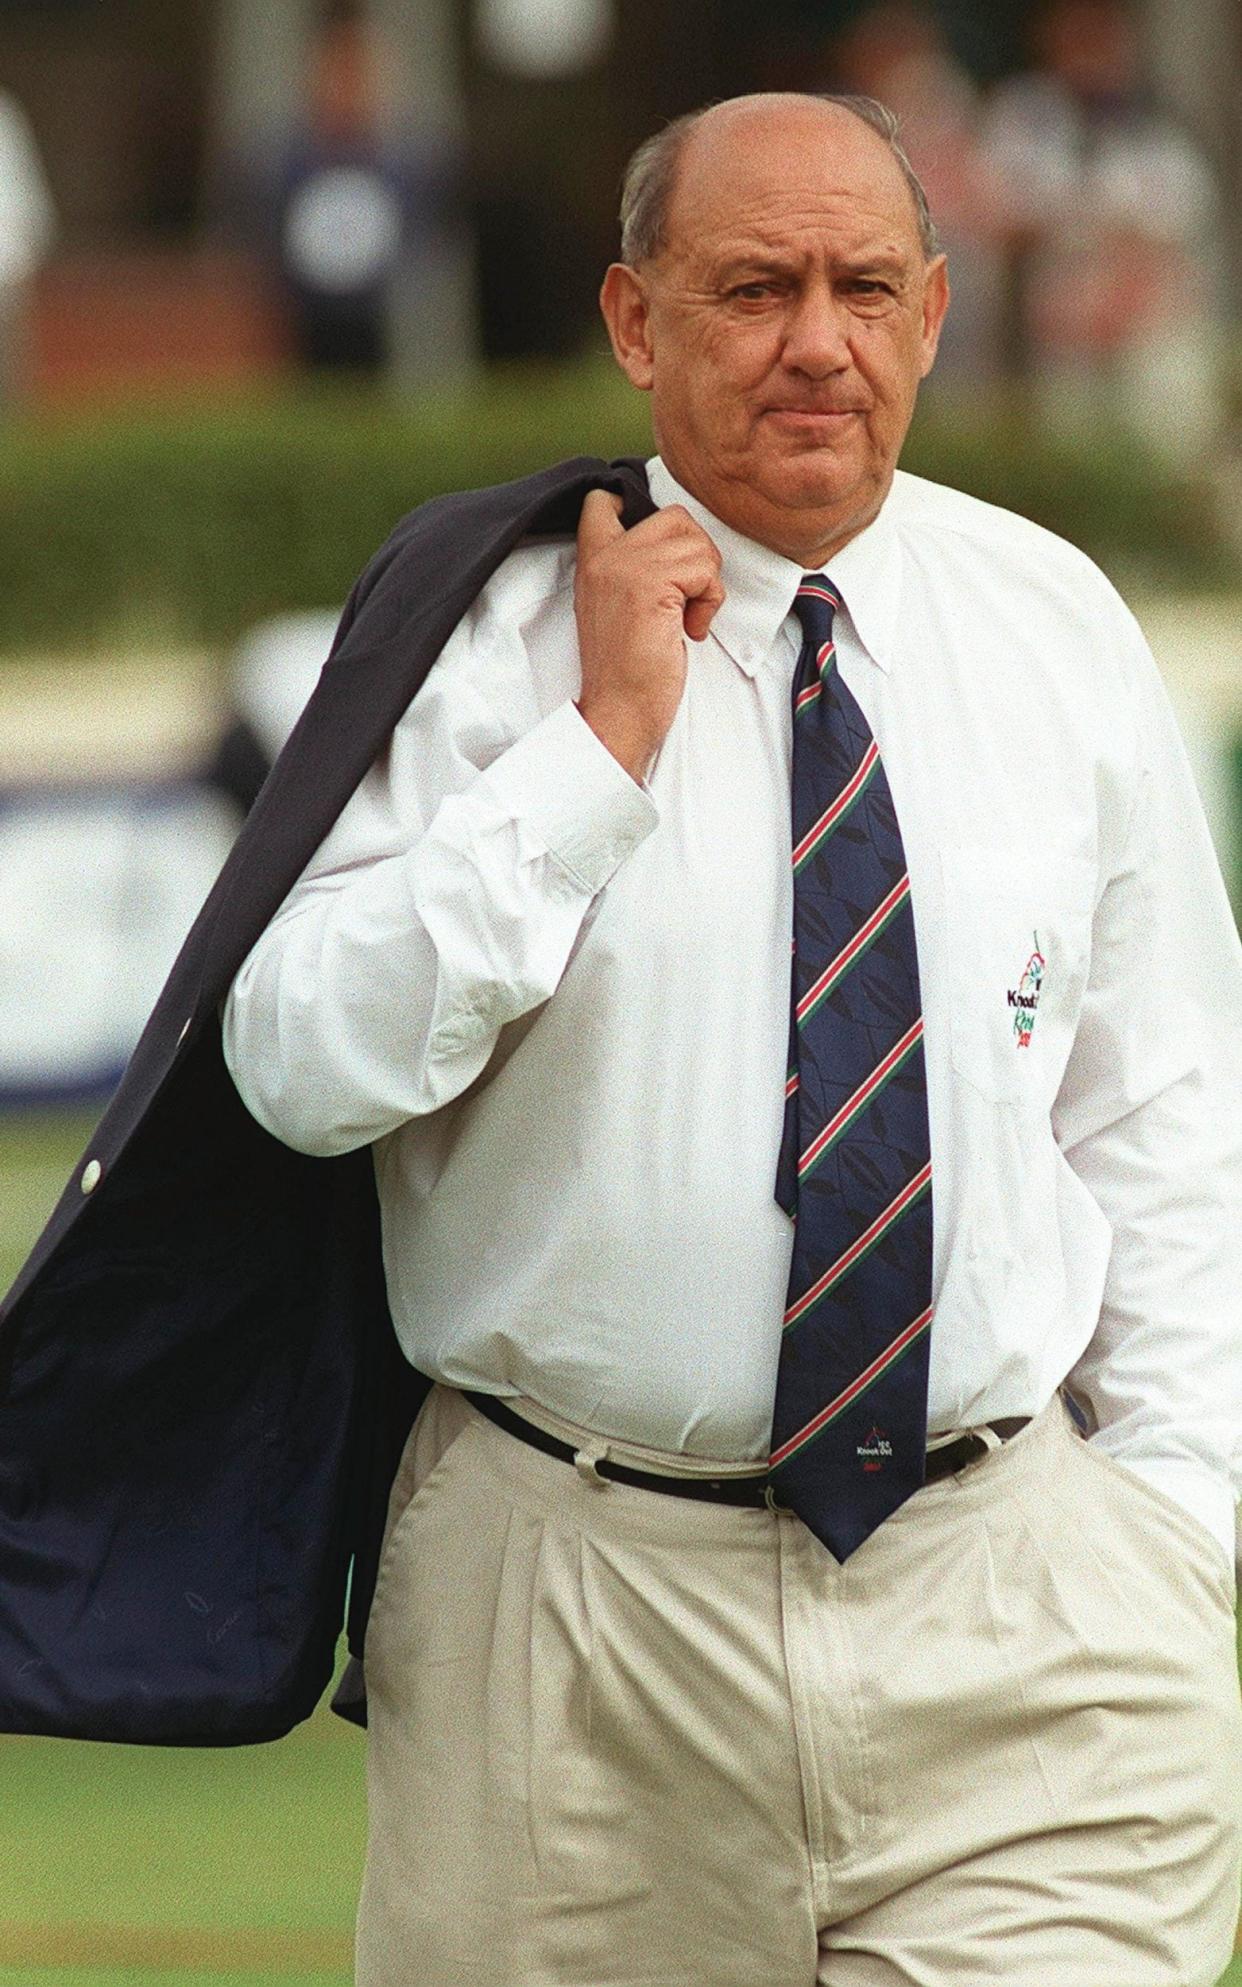 Subba Row in 2001 during his time as an ICC referee